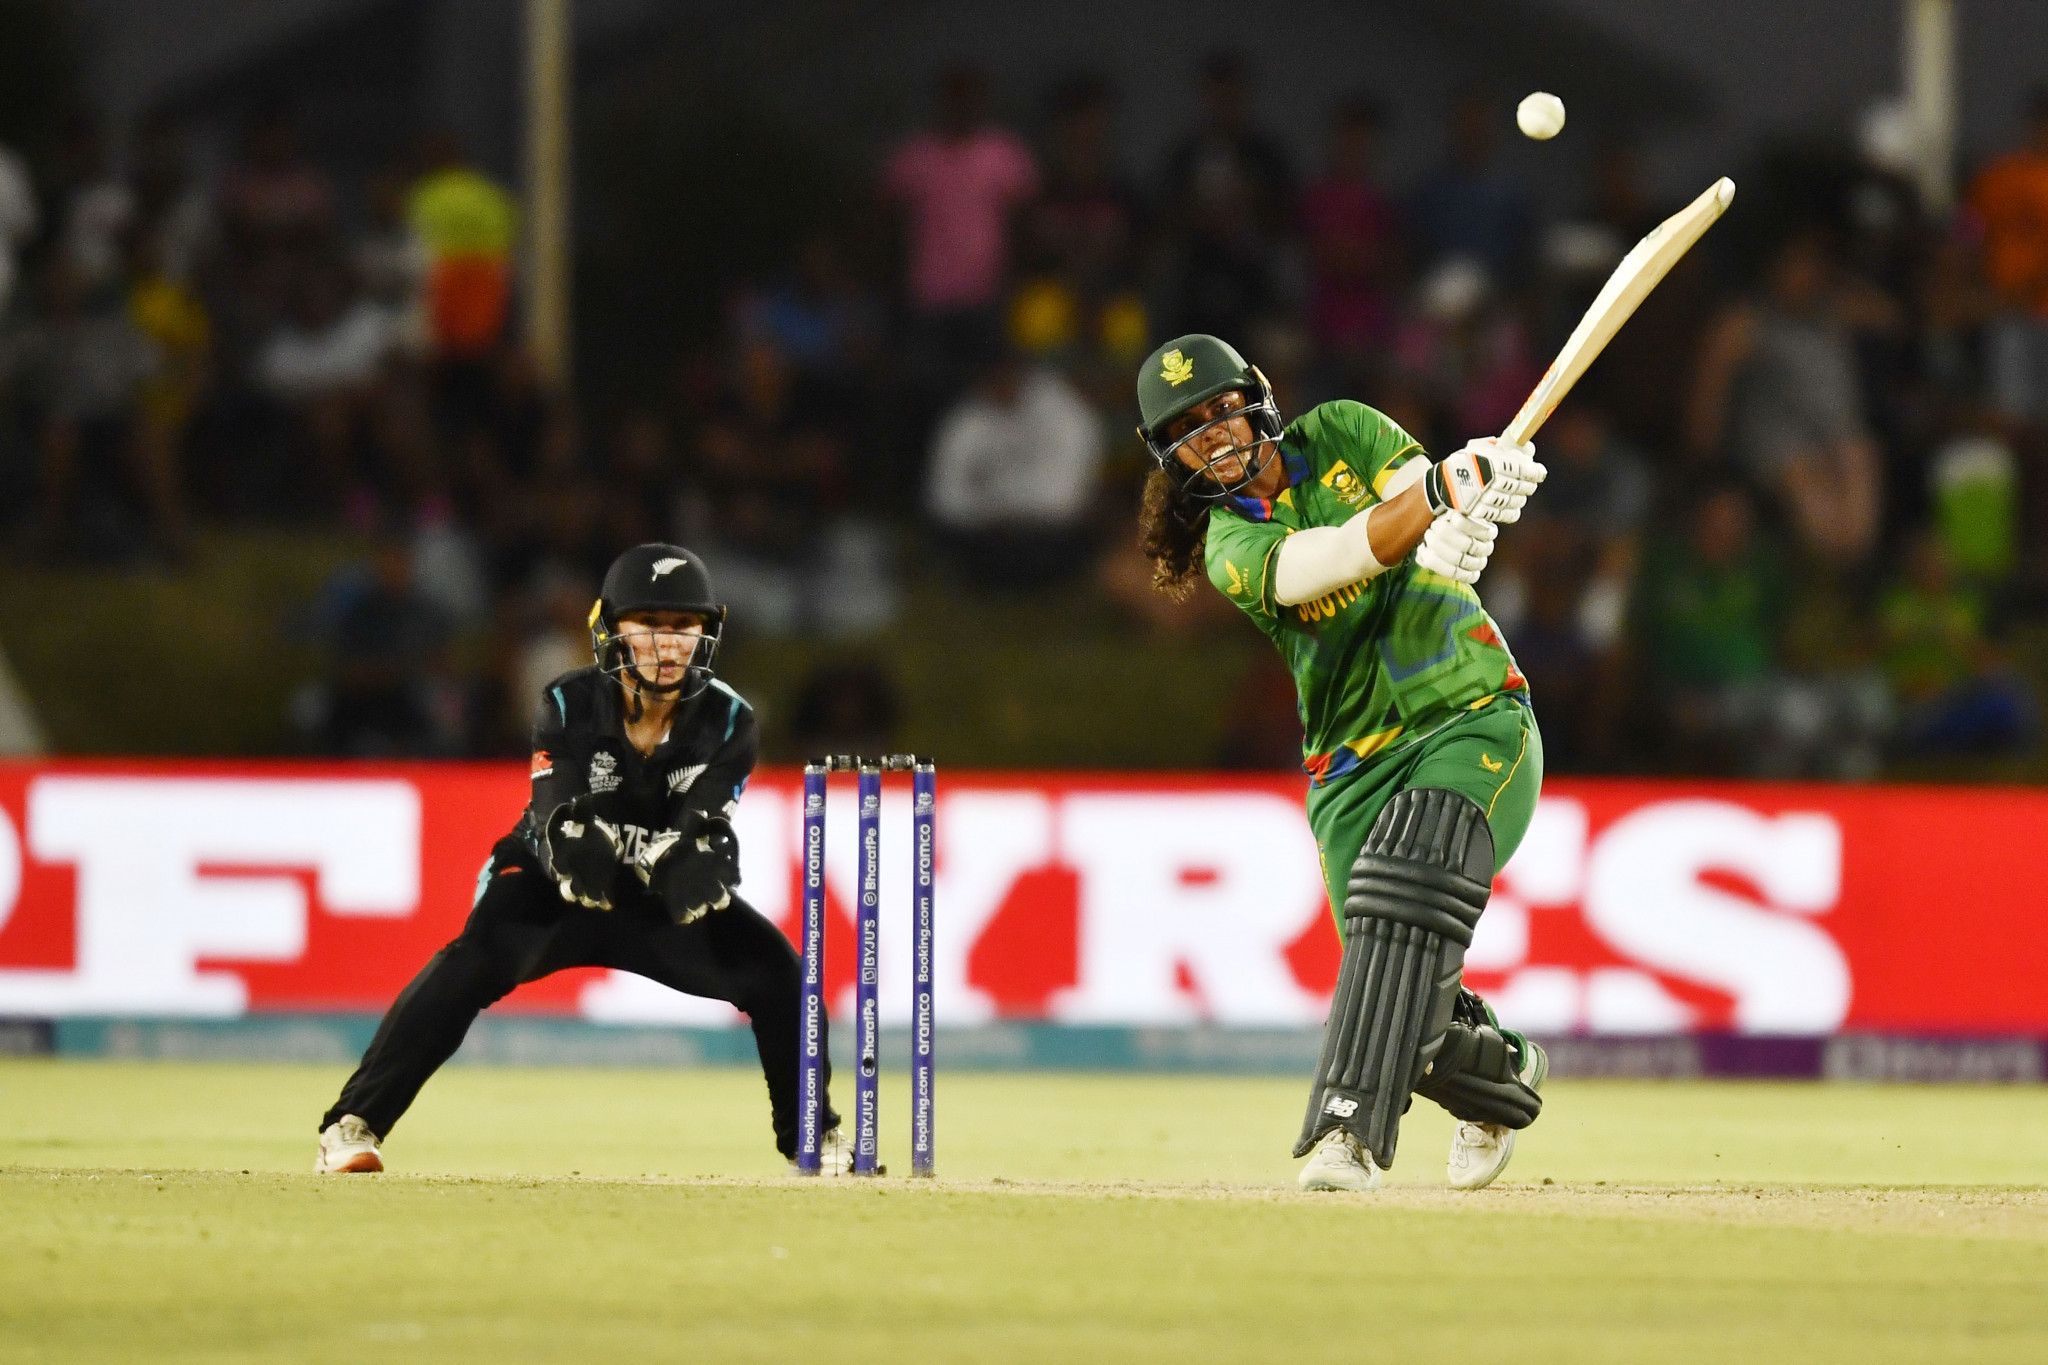 Hosts South Africa earn first win of Women’s T20 World Cup after big victory over New Zealand